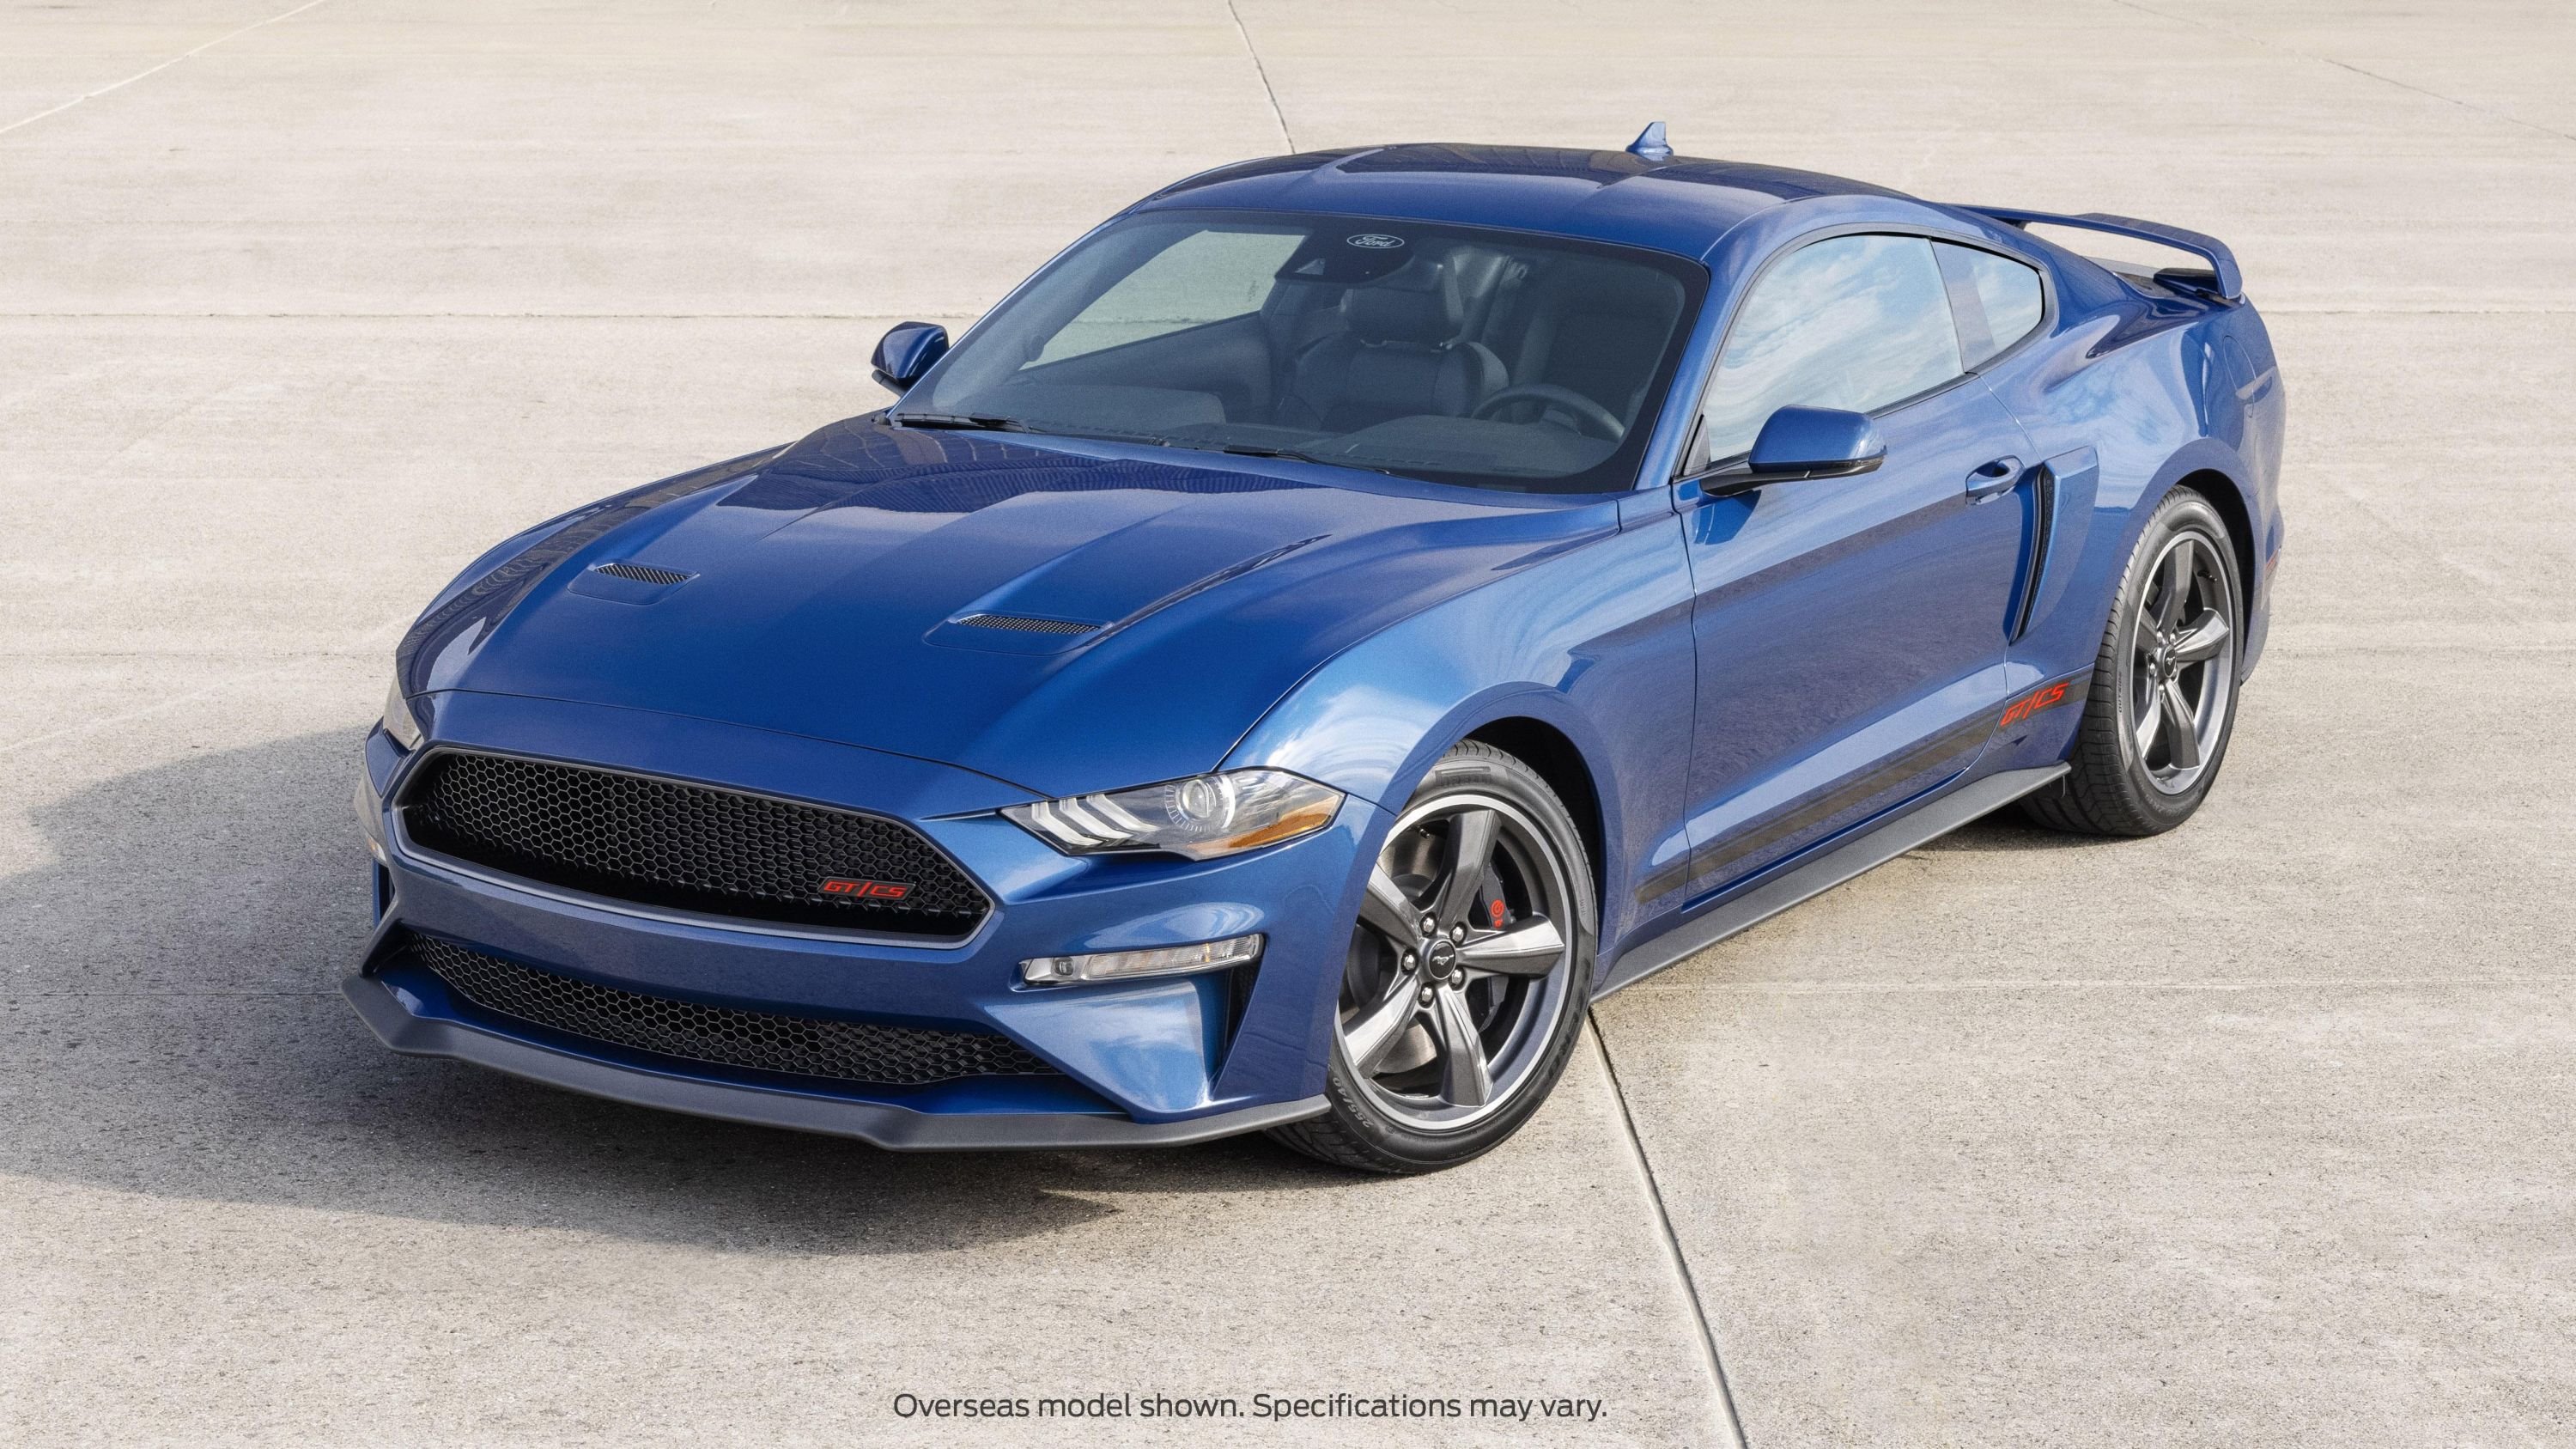 2022 Ford Mustang price and specs California Special joins range